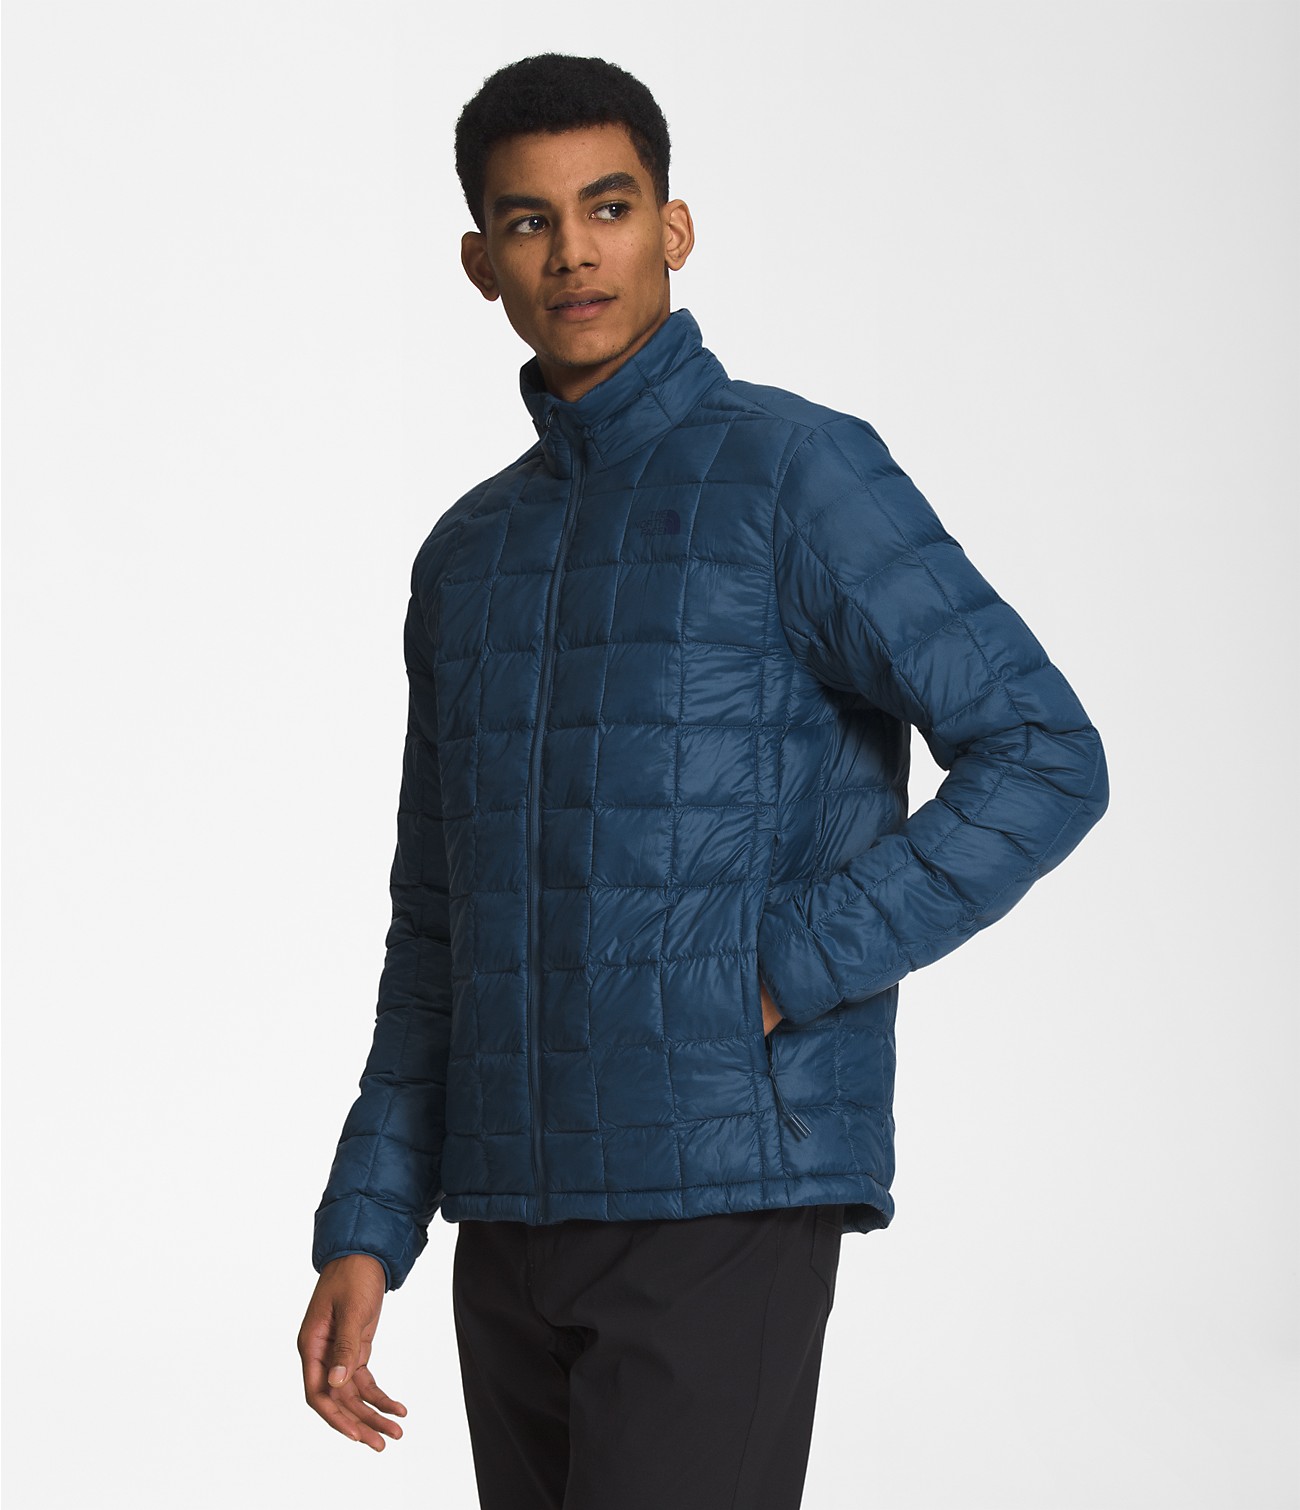 Unlock Wilderness' choice in the Barbour Vs North Face comparison, the ThermoBall™ Eco Jacket 2.0 by The North Face